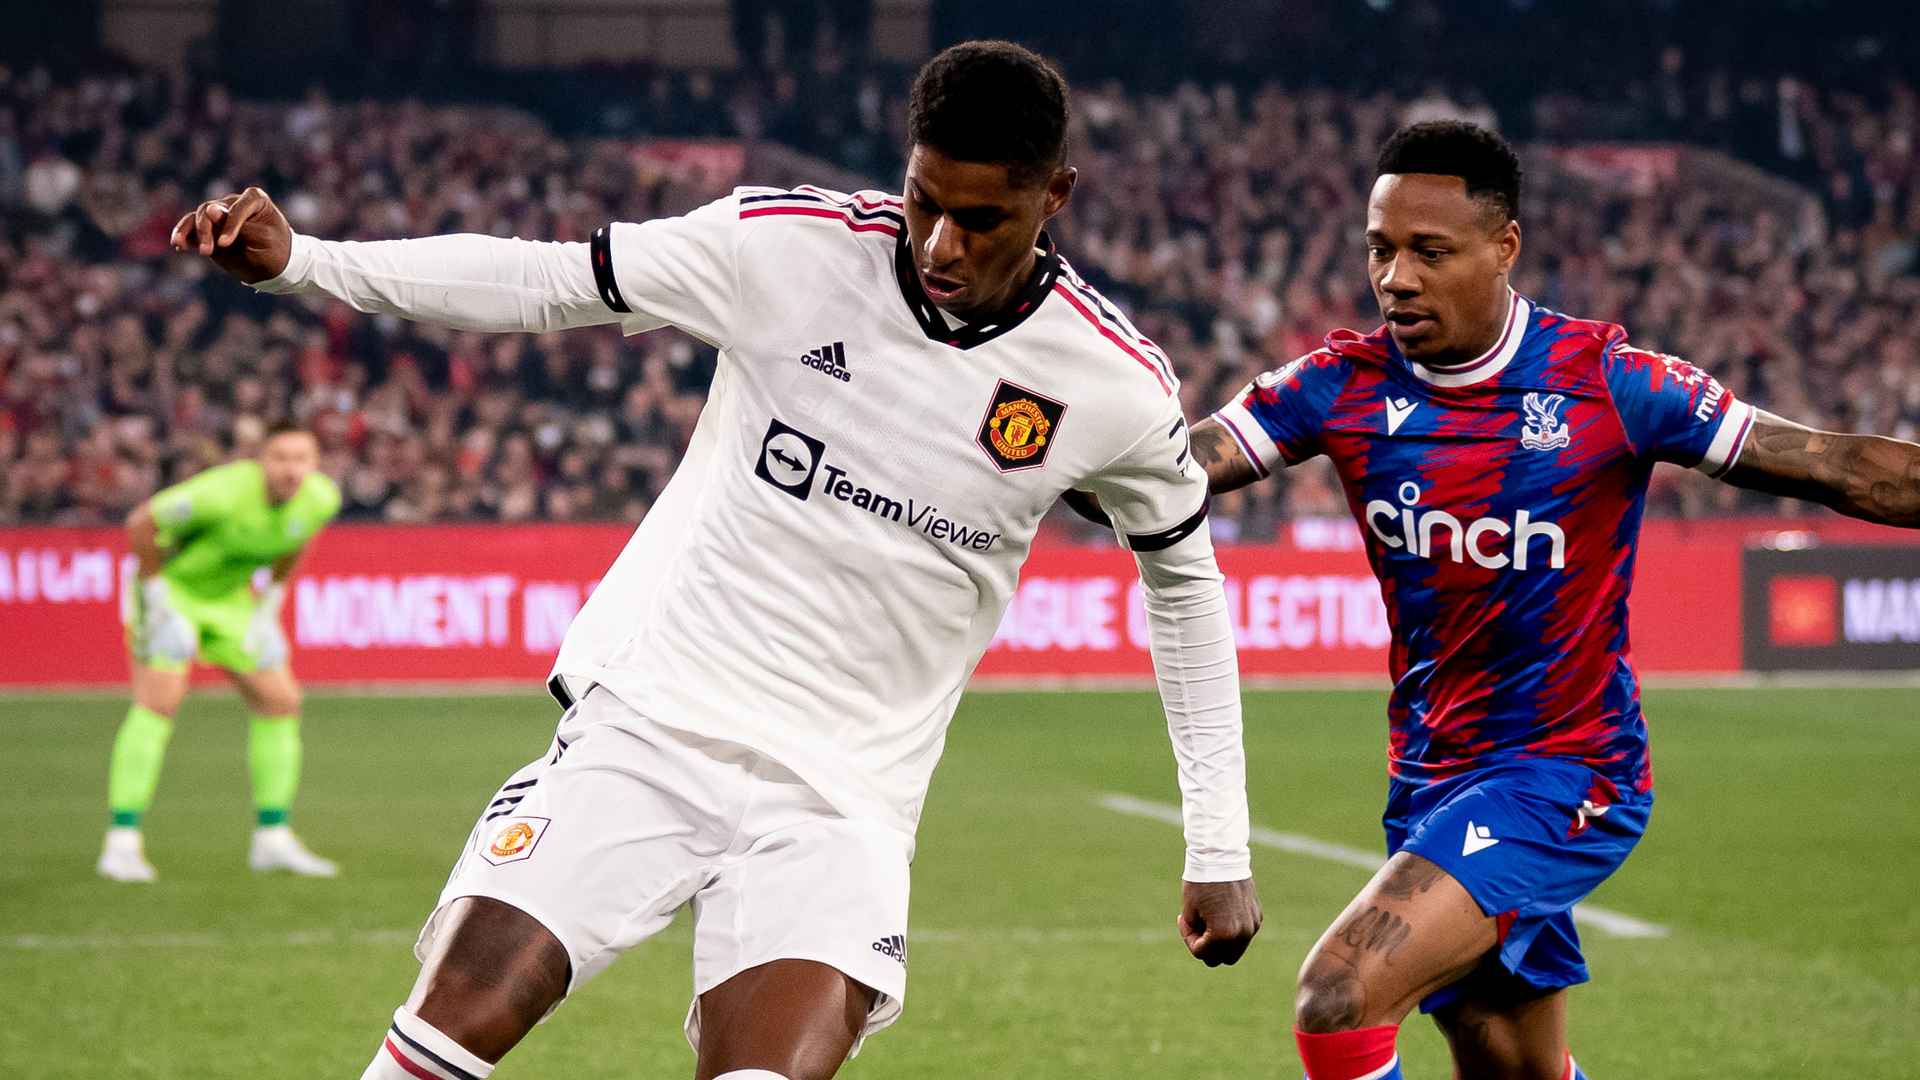 How to watch and follow Crystal Palace v Man Utd on 18 January 2023